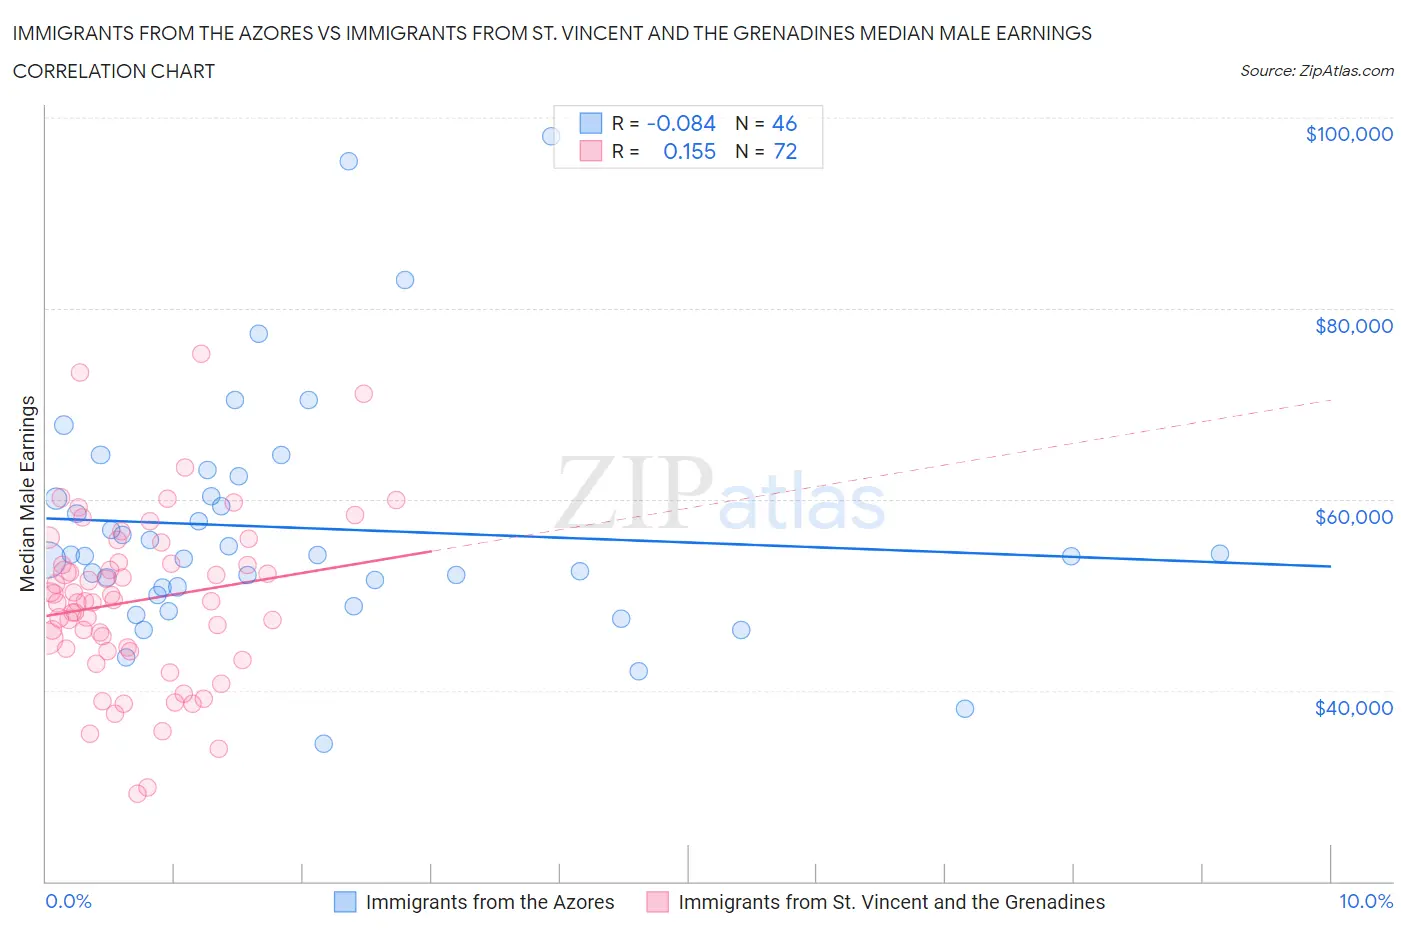 Immigrants from the Azores vs Immigrants from St. Vincent and the Grenadines Median Male Earnings